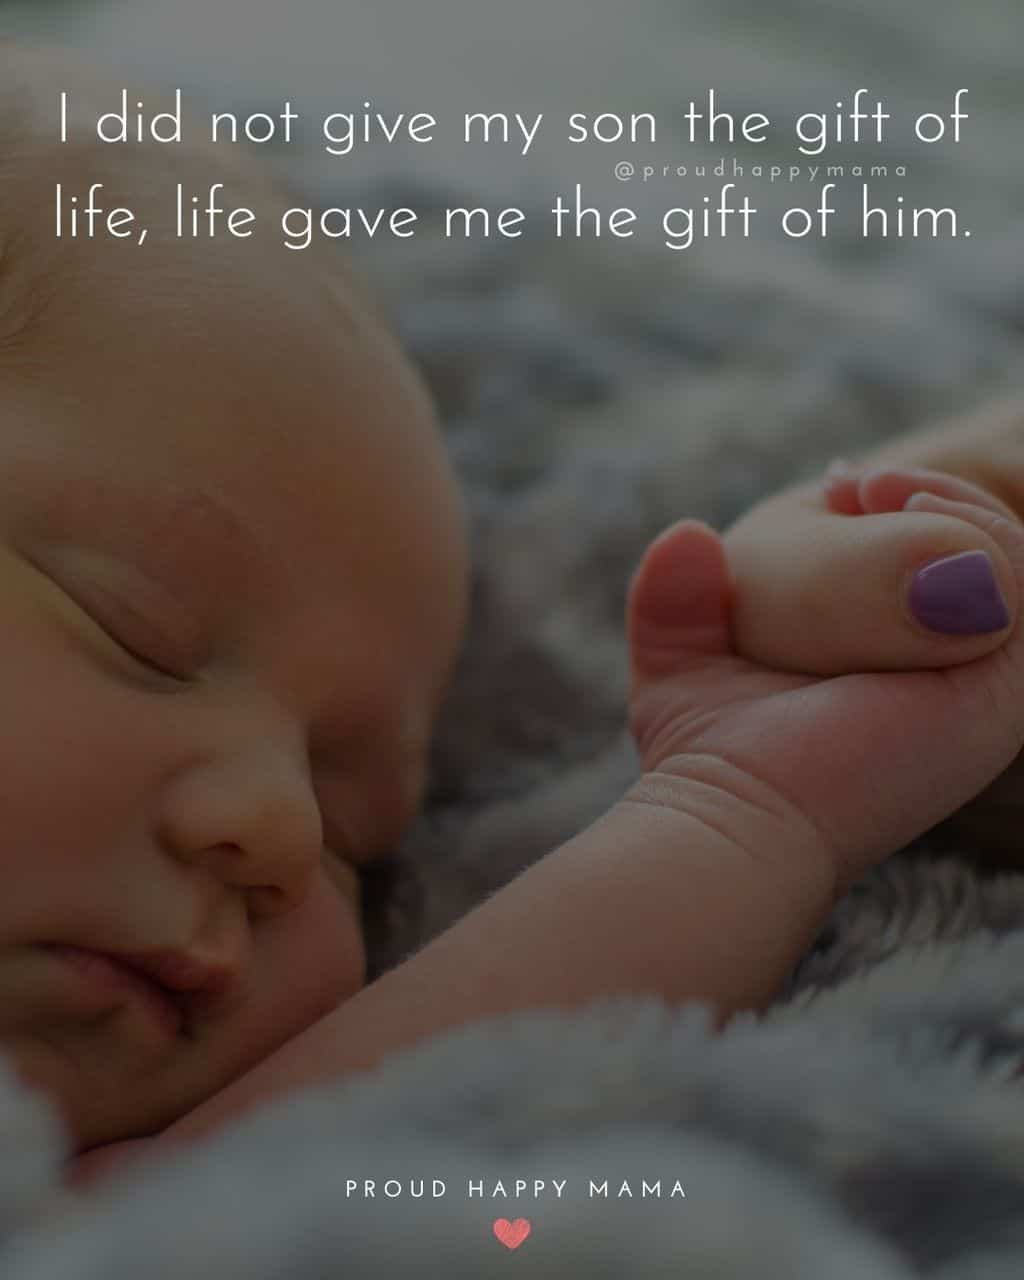 Son Quotes - I did not give my son the gift of life, life gave me the gift of him.’